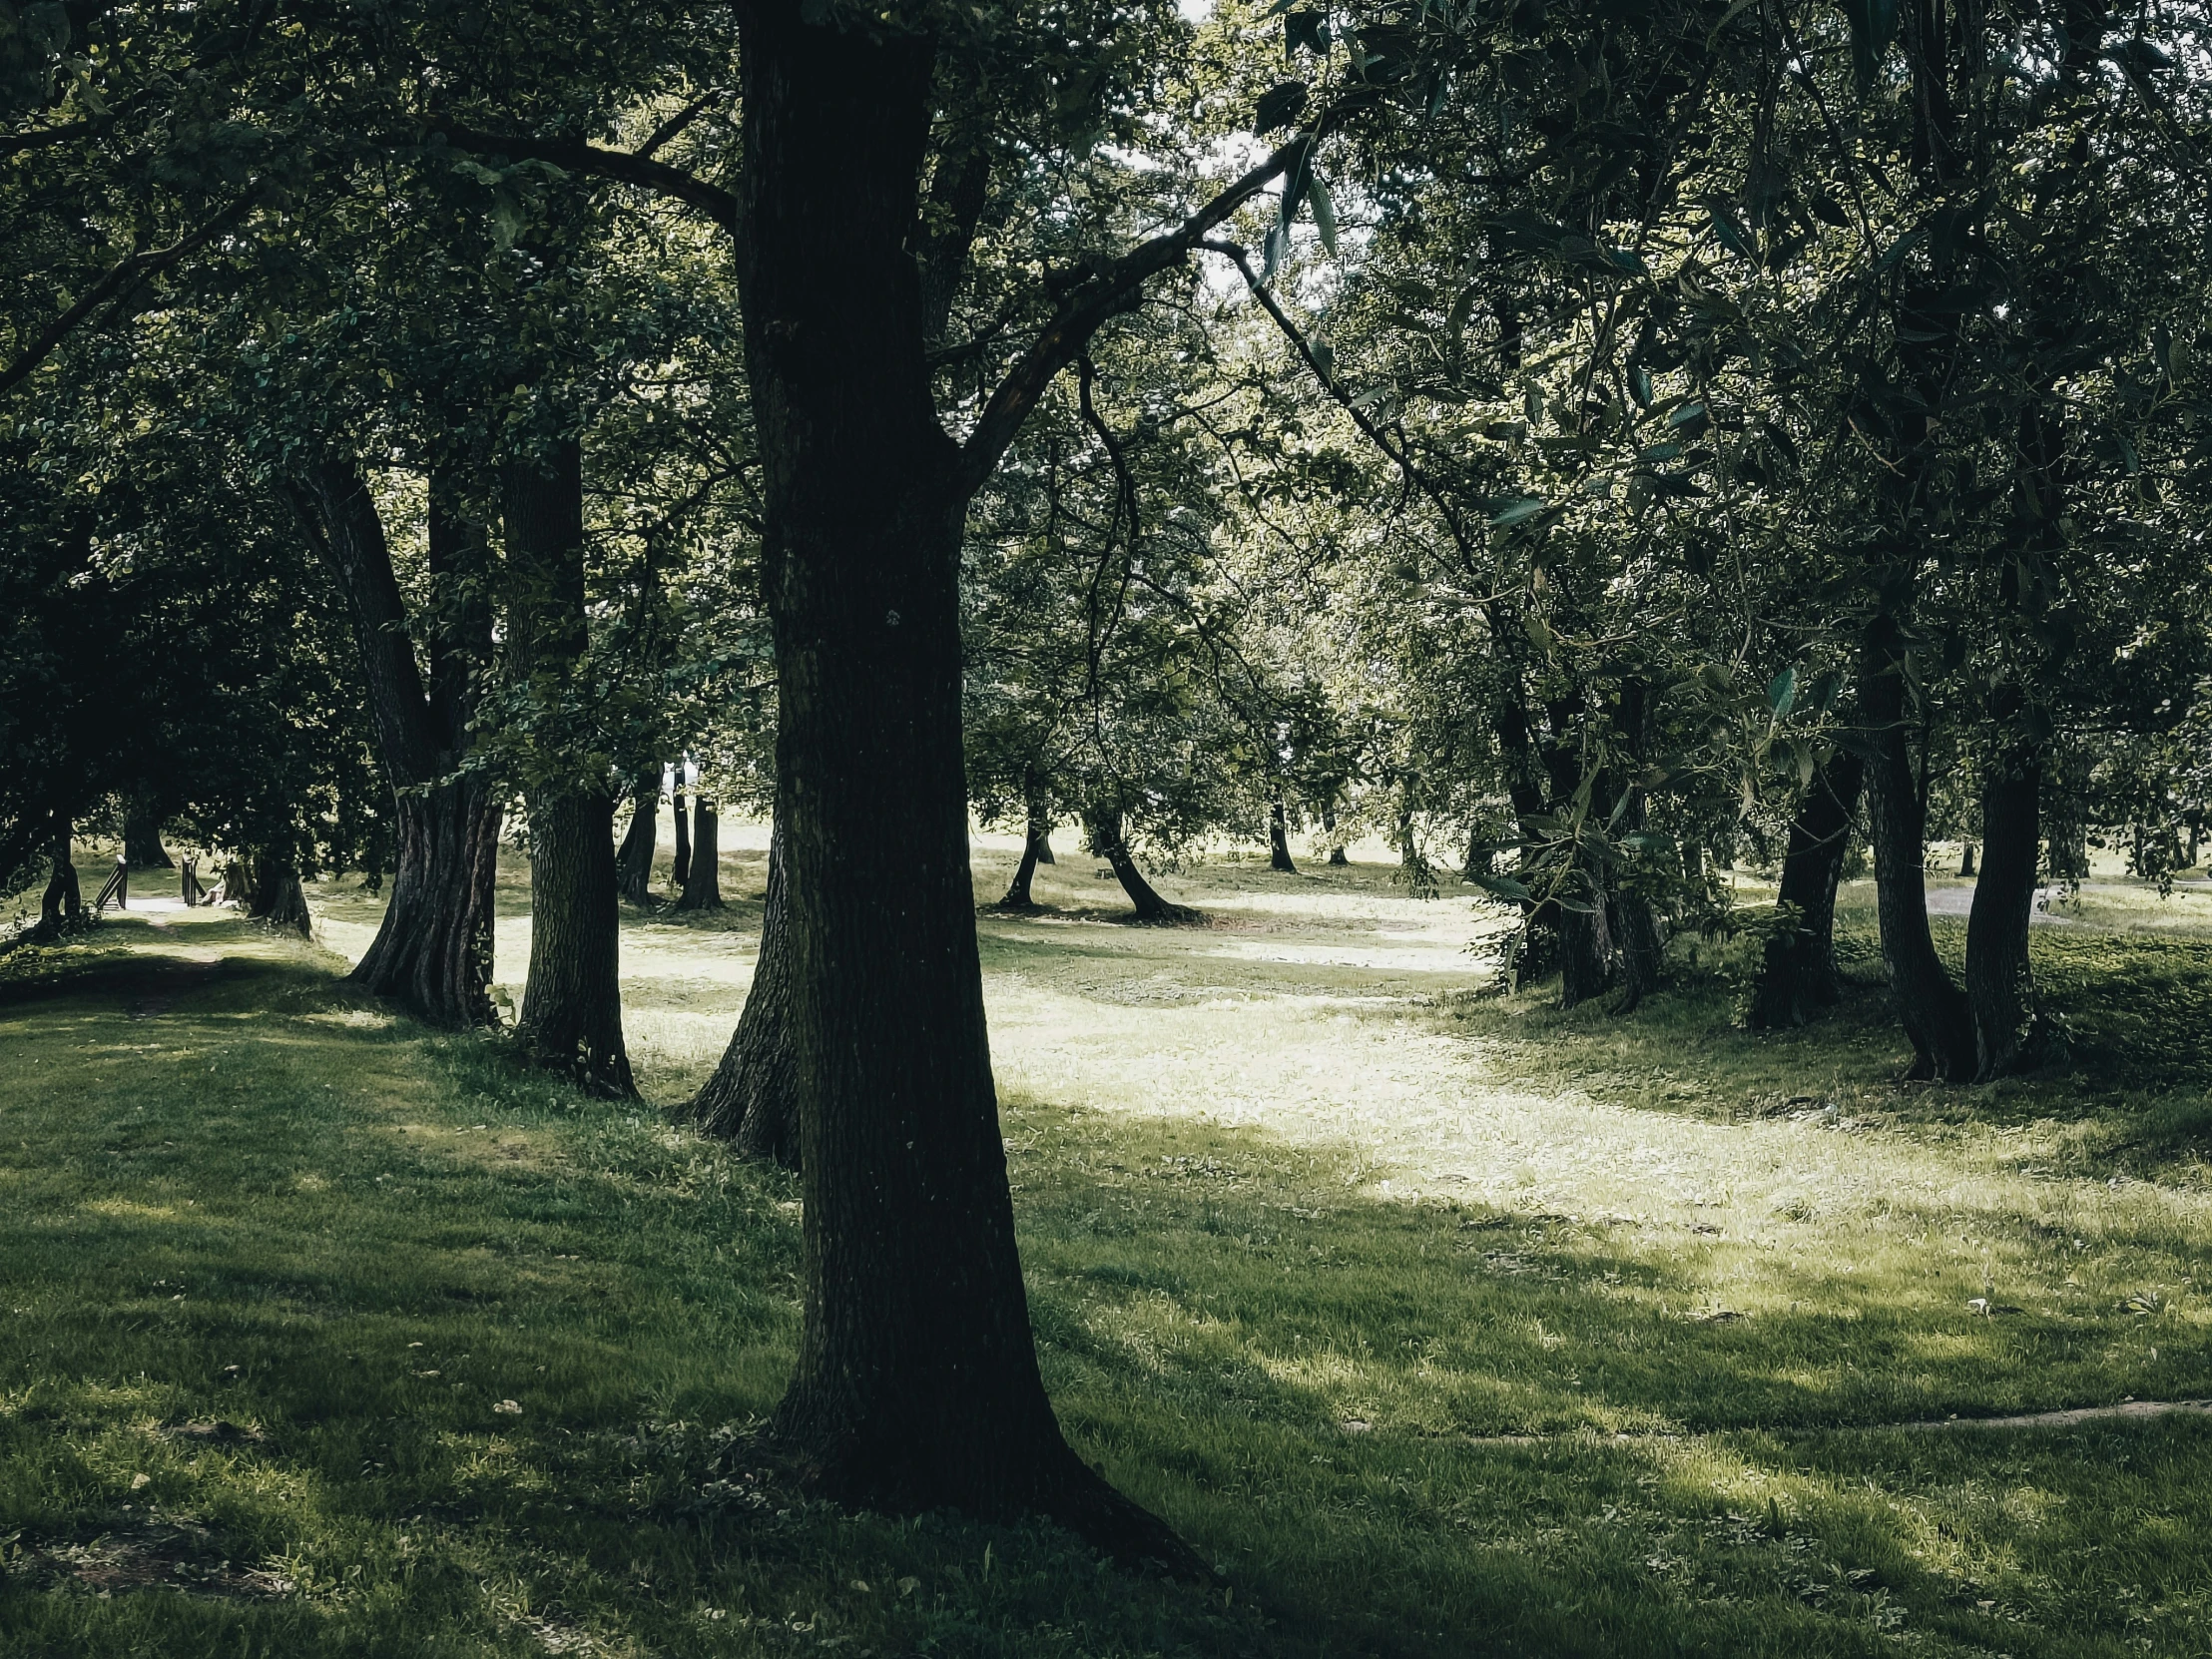 trees lining a grassy path between two fields